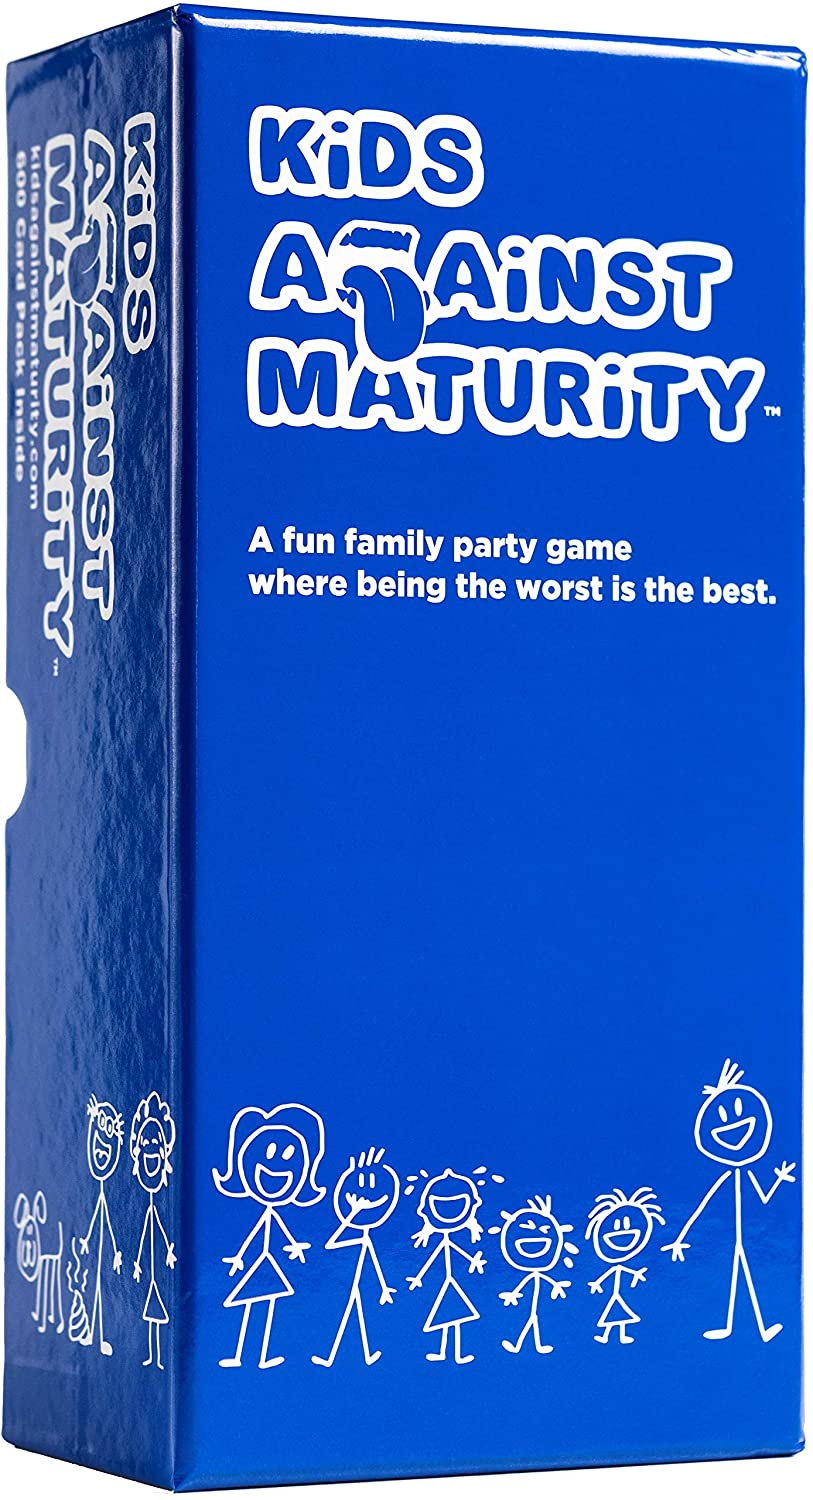 Kids Against Maturity Core Card Game For Kids 10 And Up